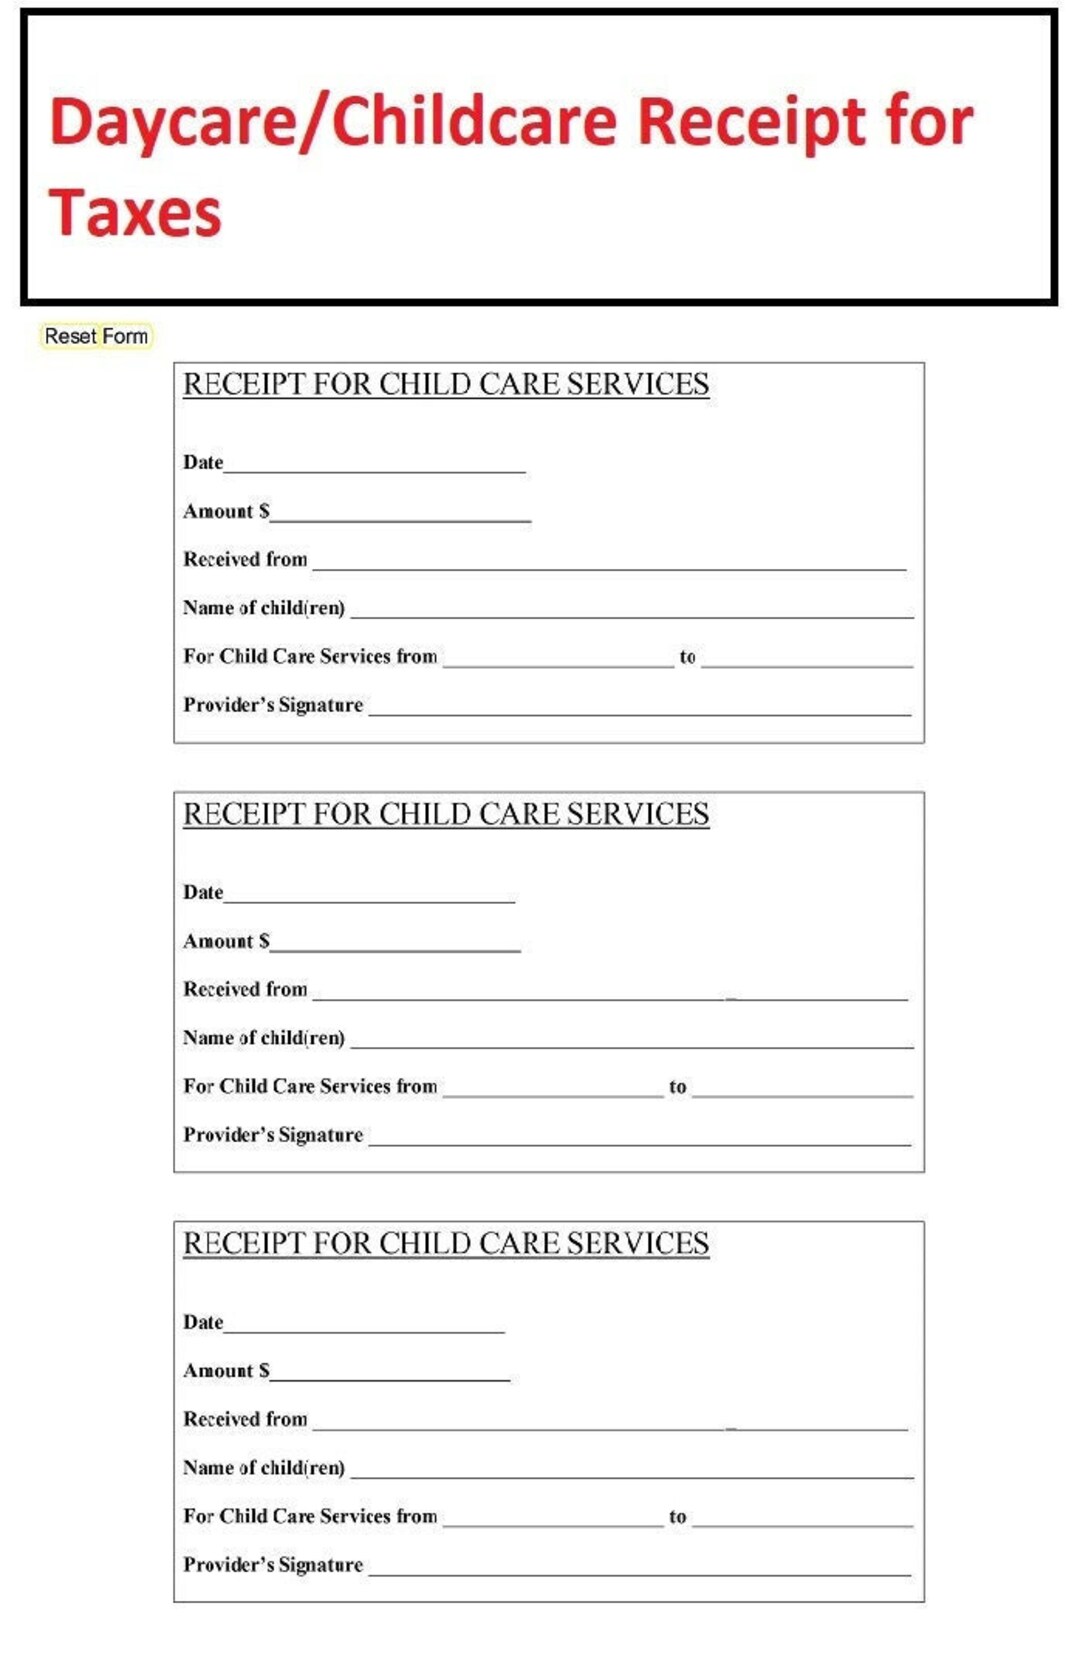 Childcare Receipts For Parents Taxes Daycare Receipts For Parents Taxes Fillable PDF Form